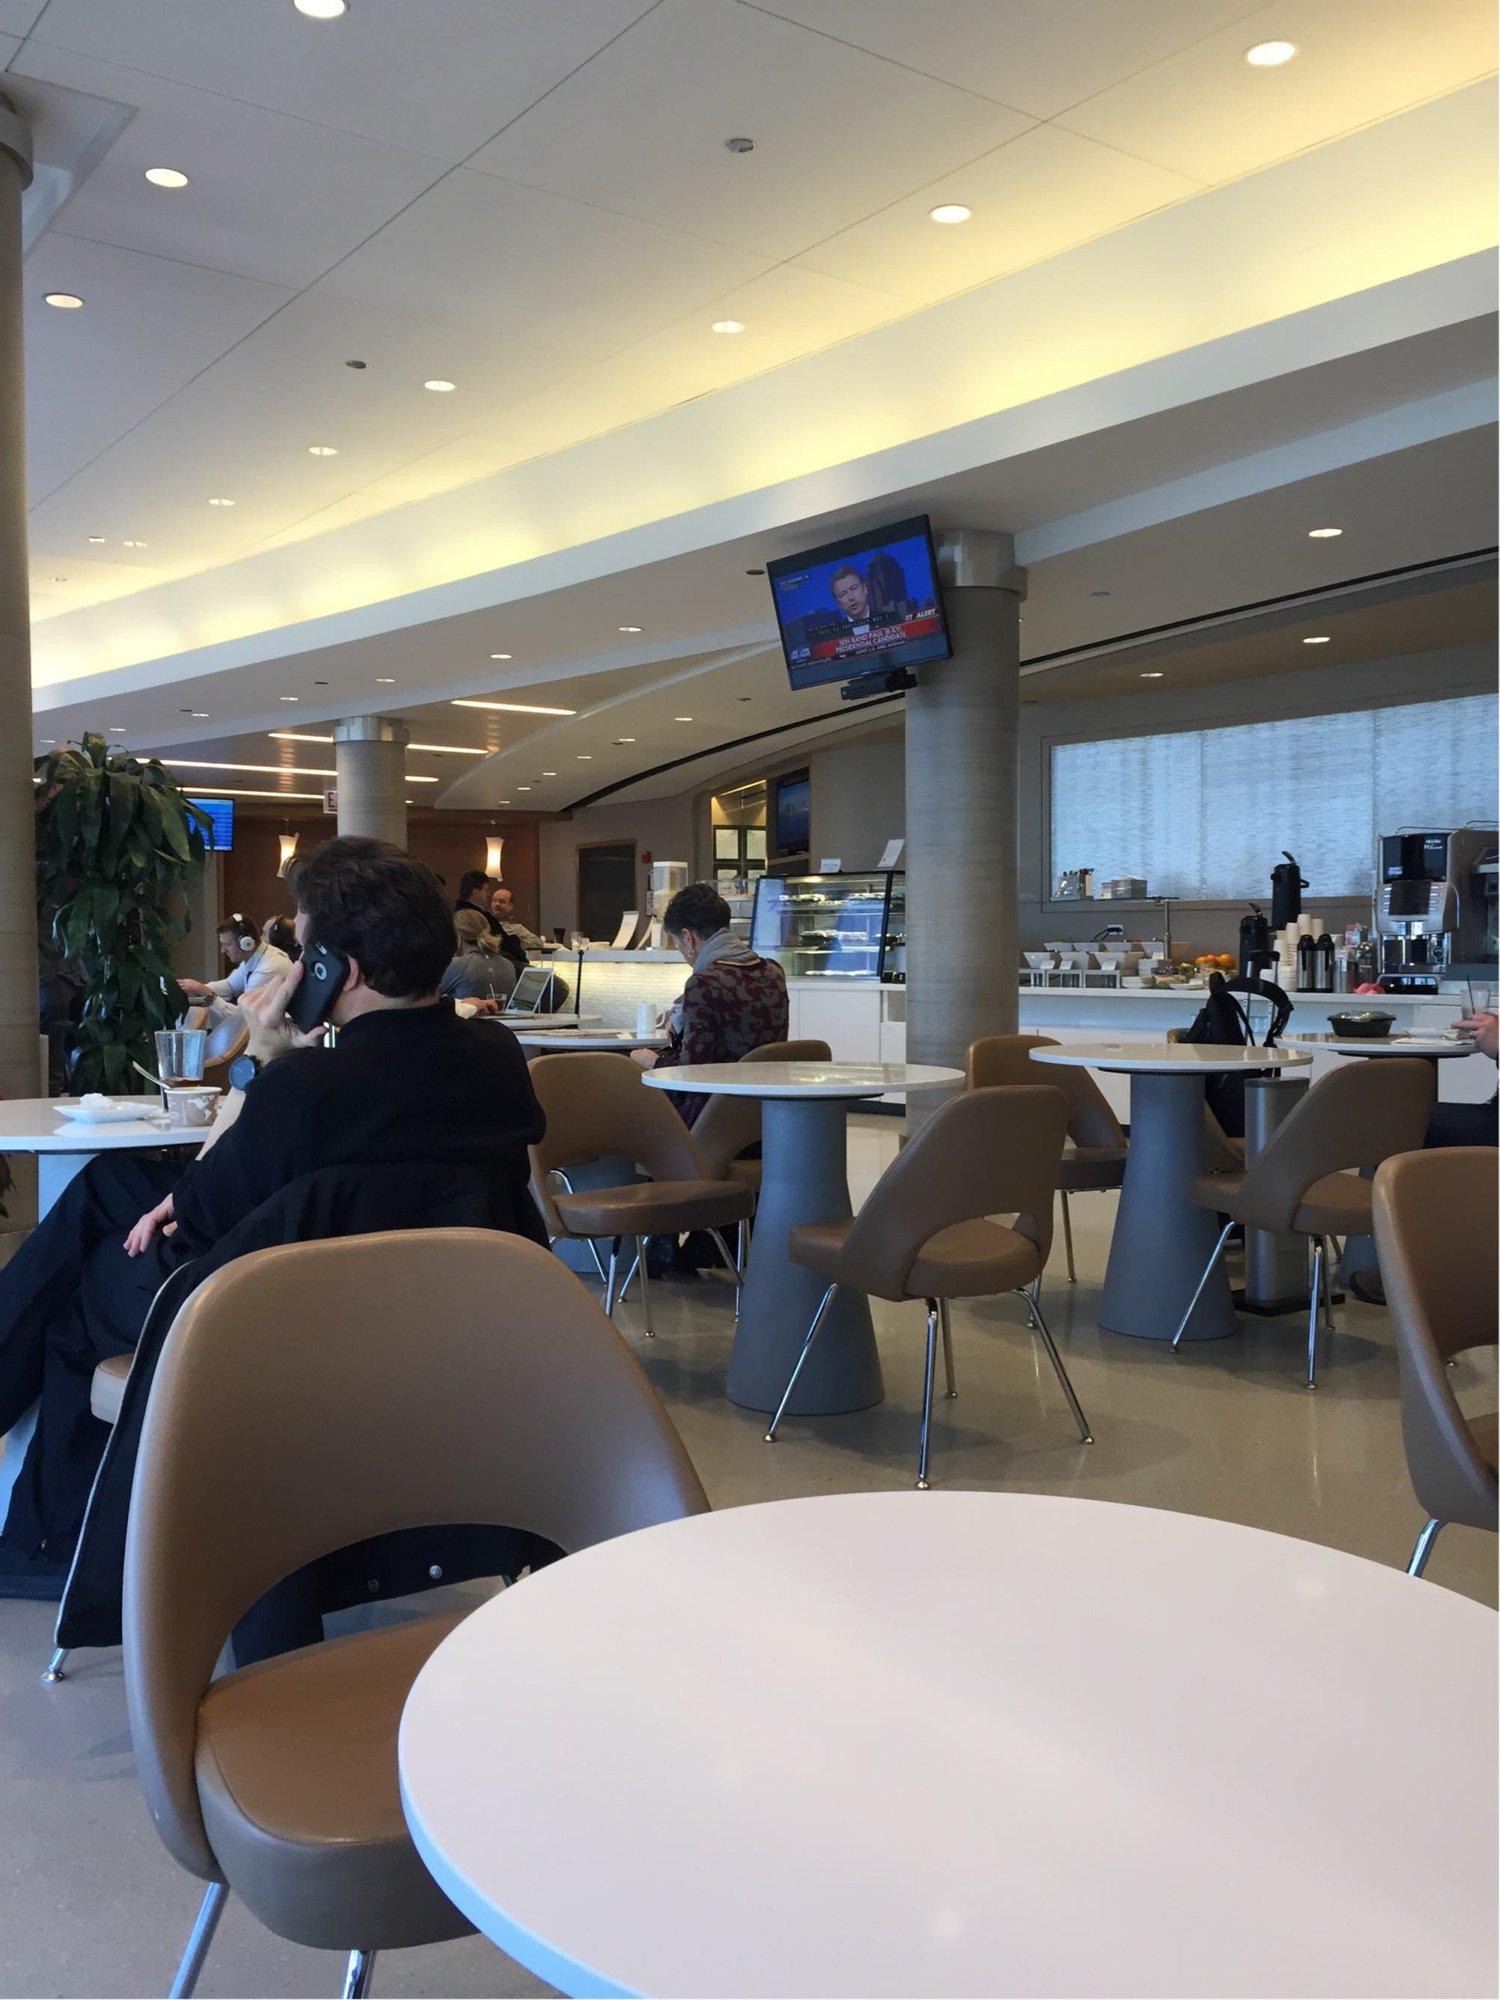 American Airlines Admirals Club image 35 of 50